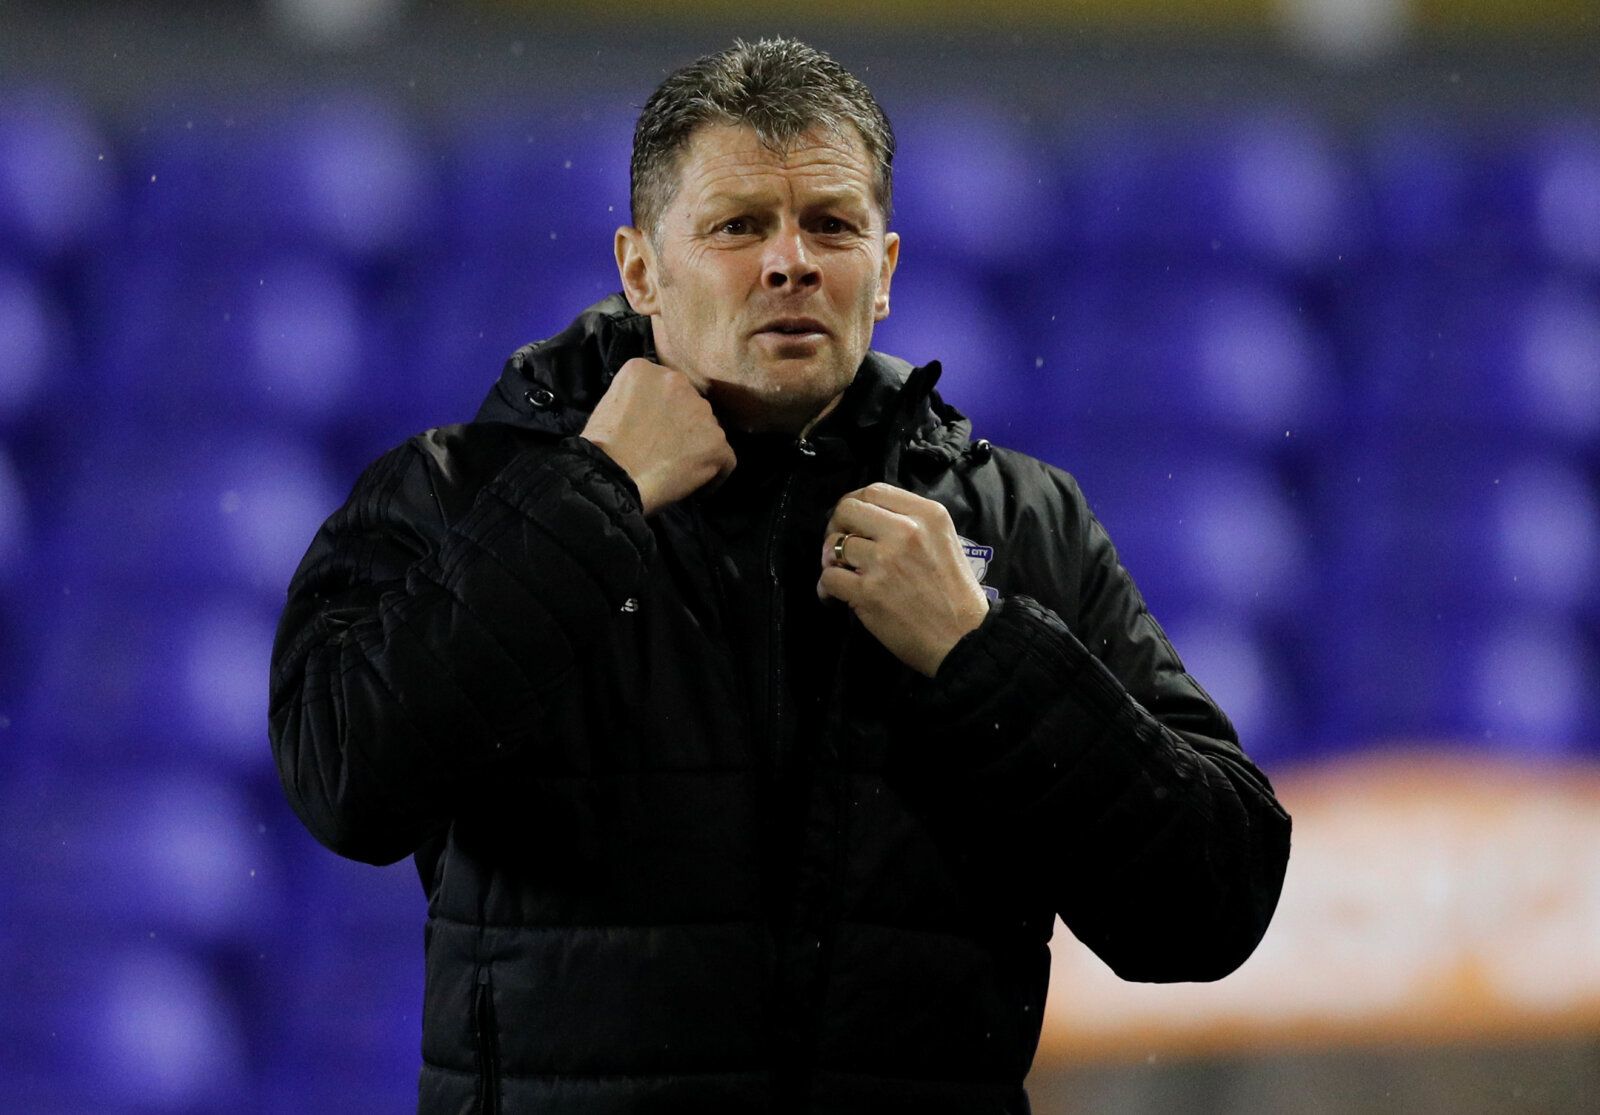 Soccer Football - FA Cup Fourth Round Replay - Birmingham City vs Huddersfield Town - St Andrew's, Birmingham, Britain - February 6, 2018   Birmingham City manager Steve Cotterill before the match   REUTERS/Darren Staples